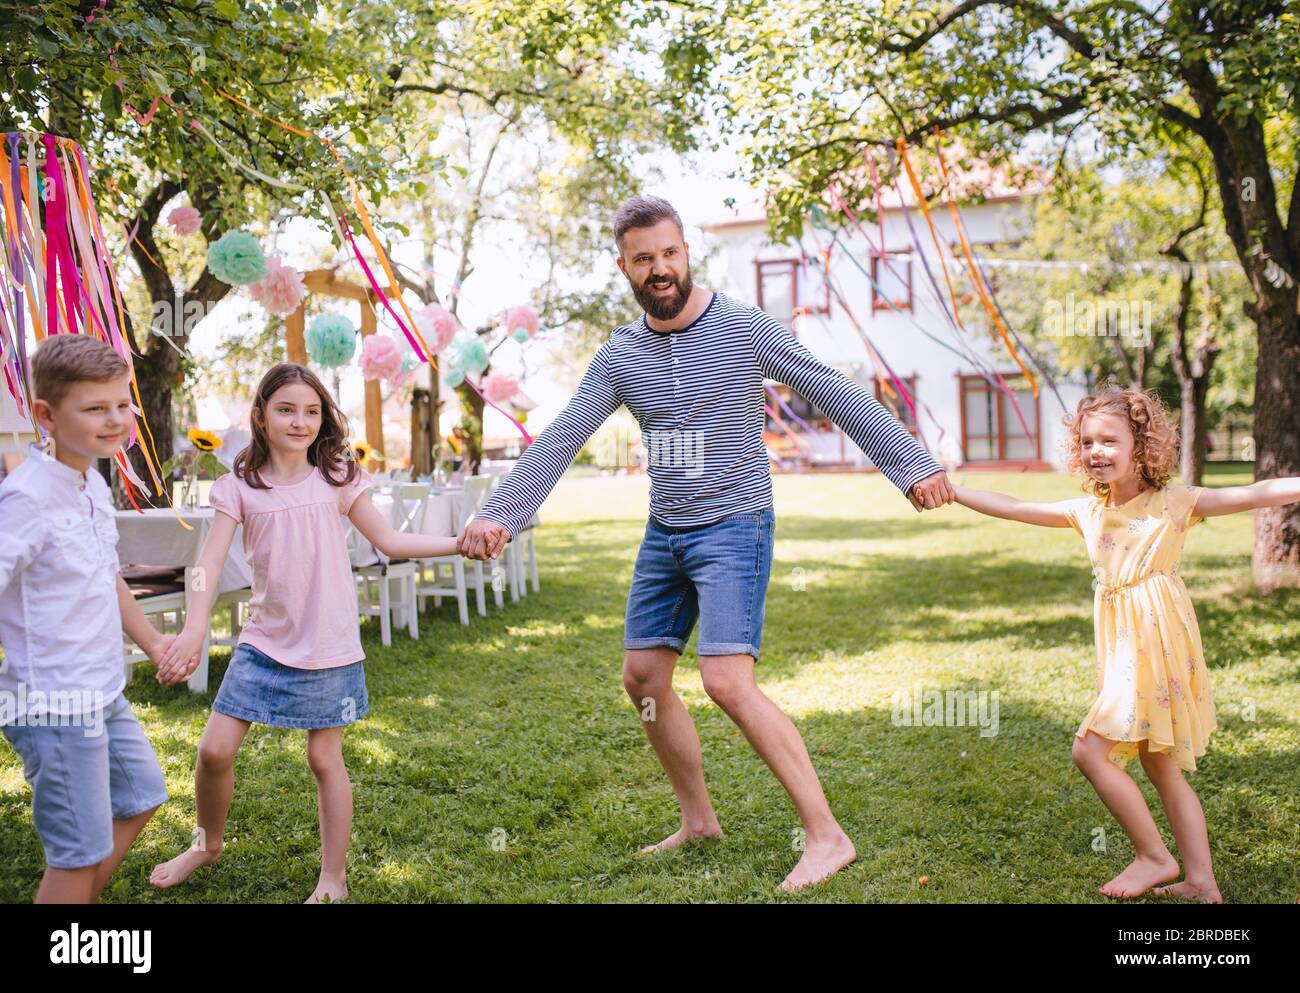 Man with kids on birthday party playing outdoors in garden in summer. Stock Photo